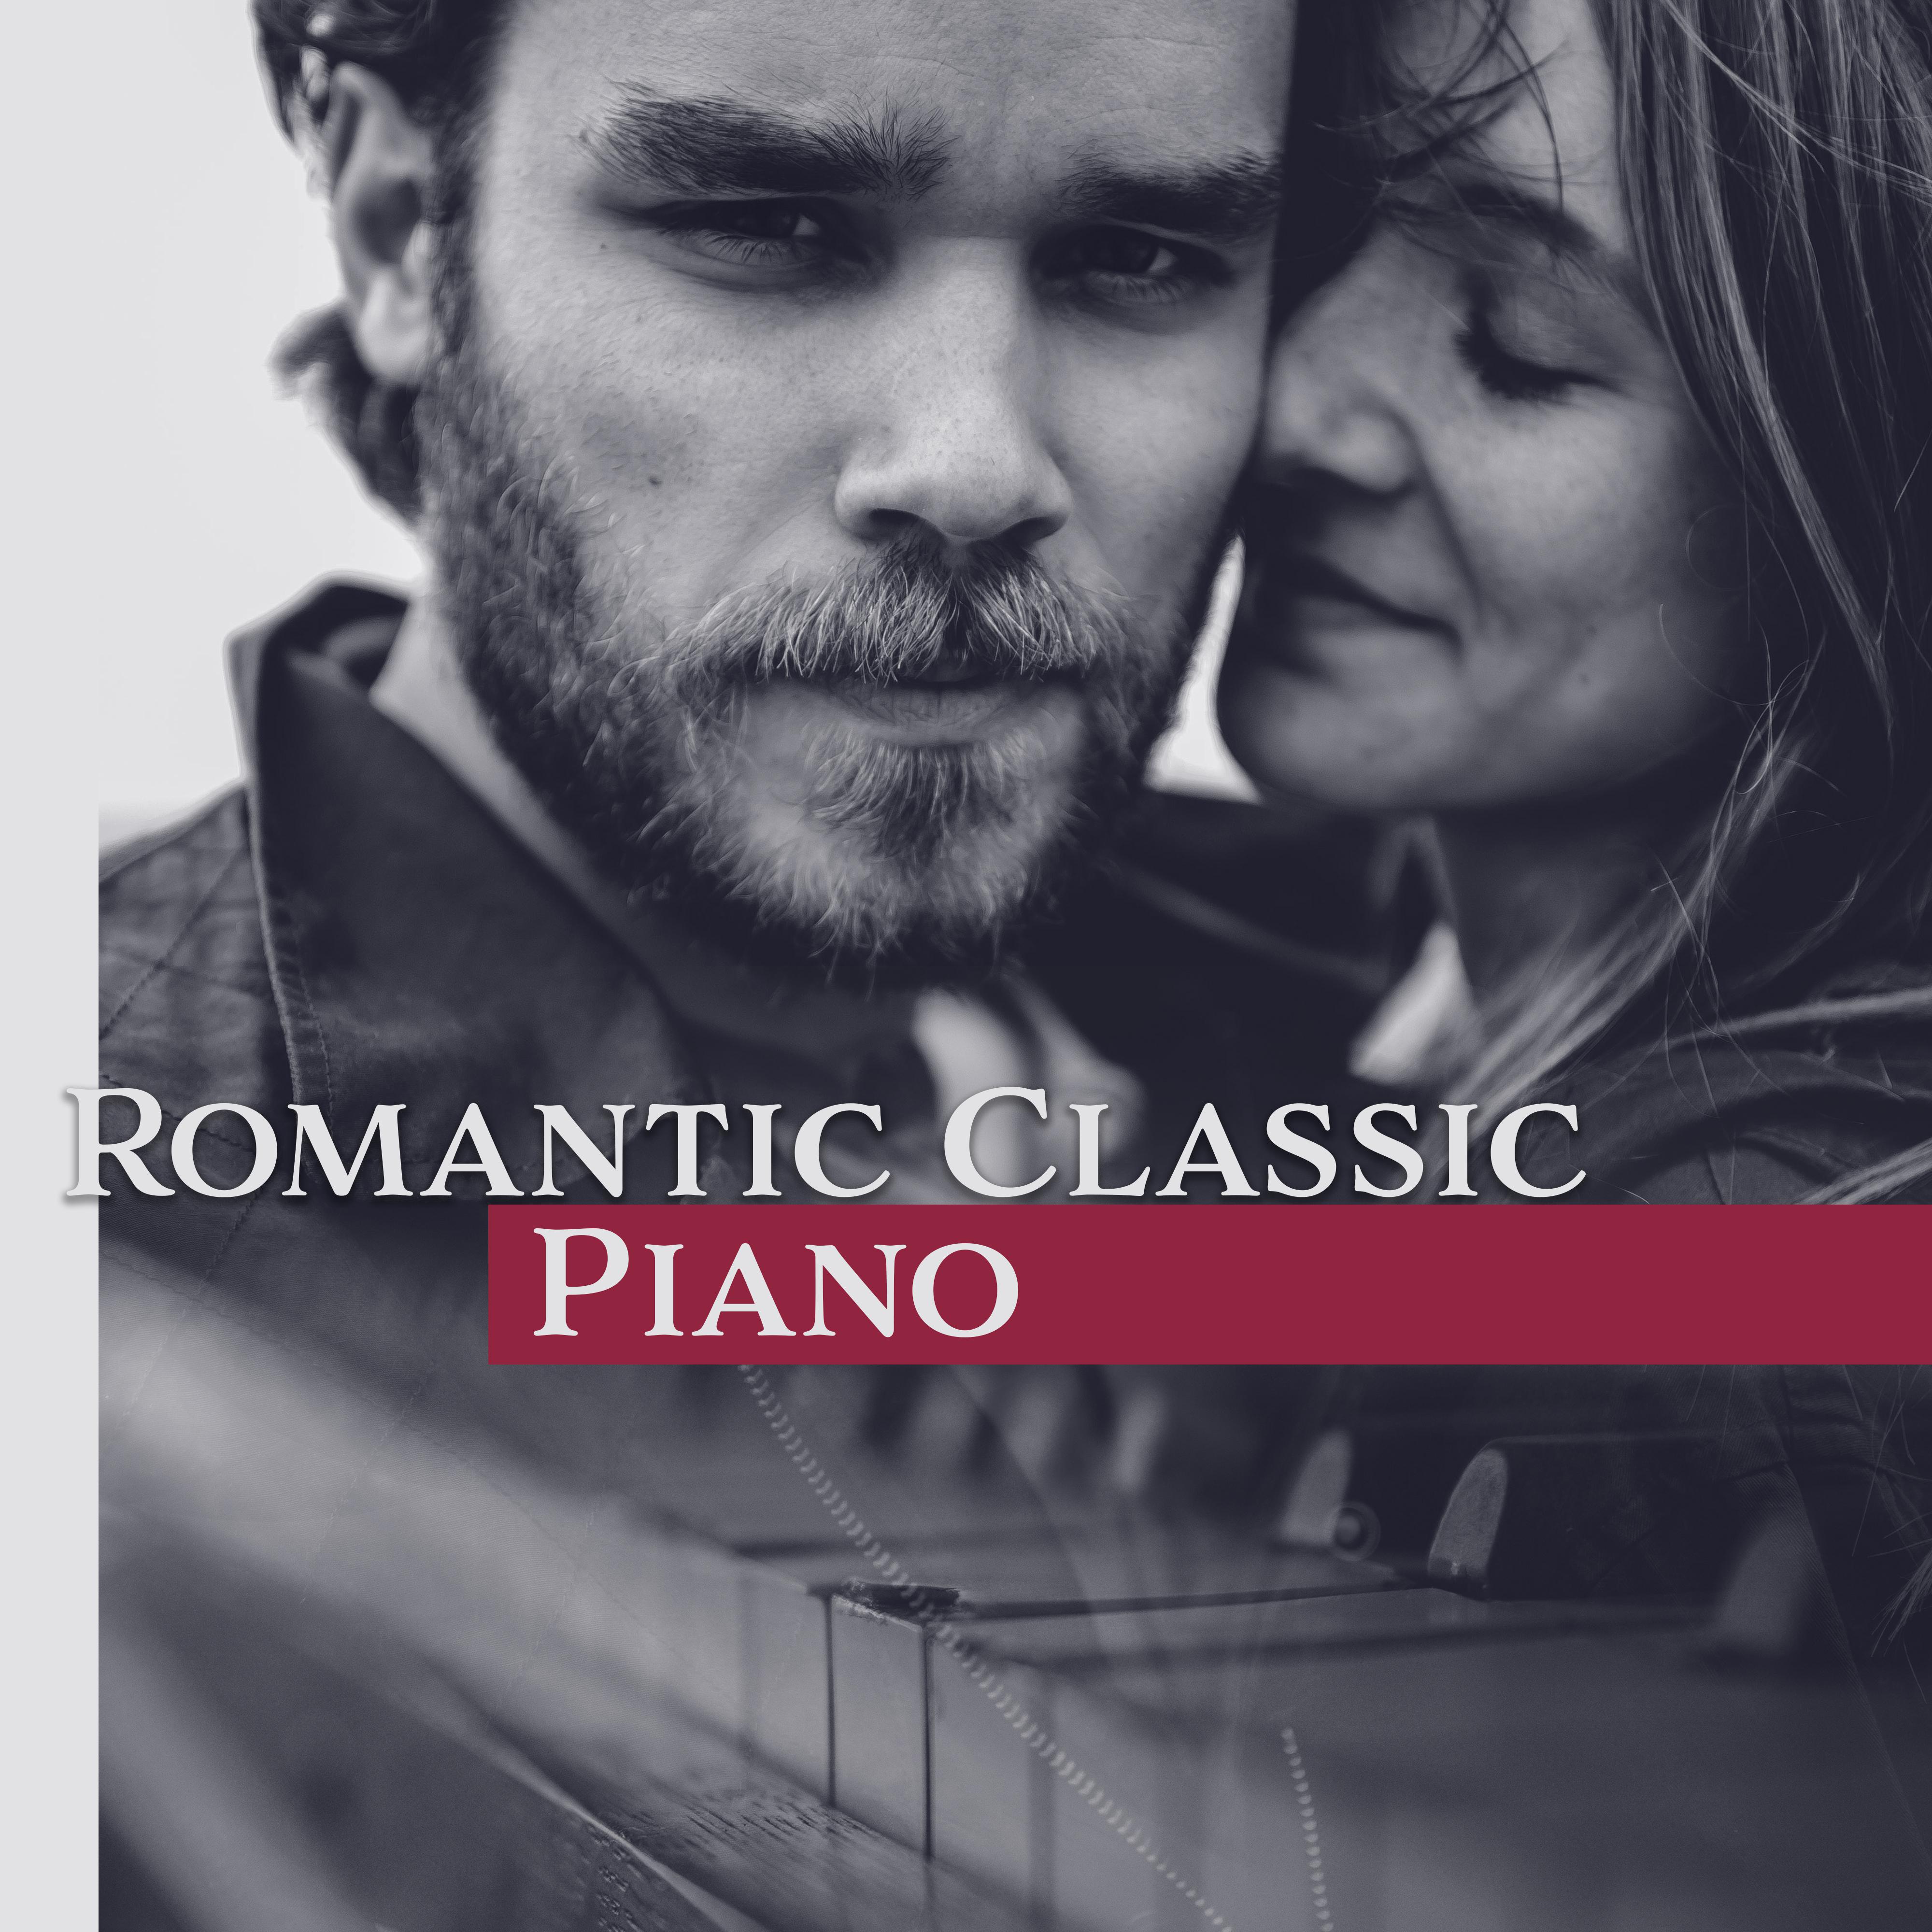 Romantic Classic Piano  Classic Music, Background for Dinner, Romantic Piano, Family Dinner